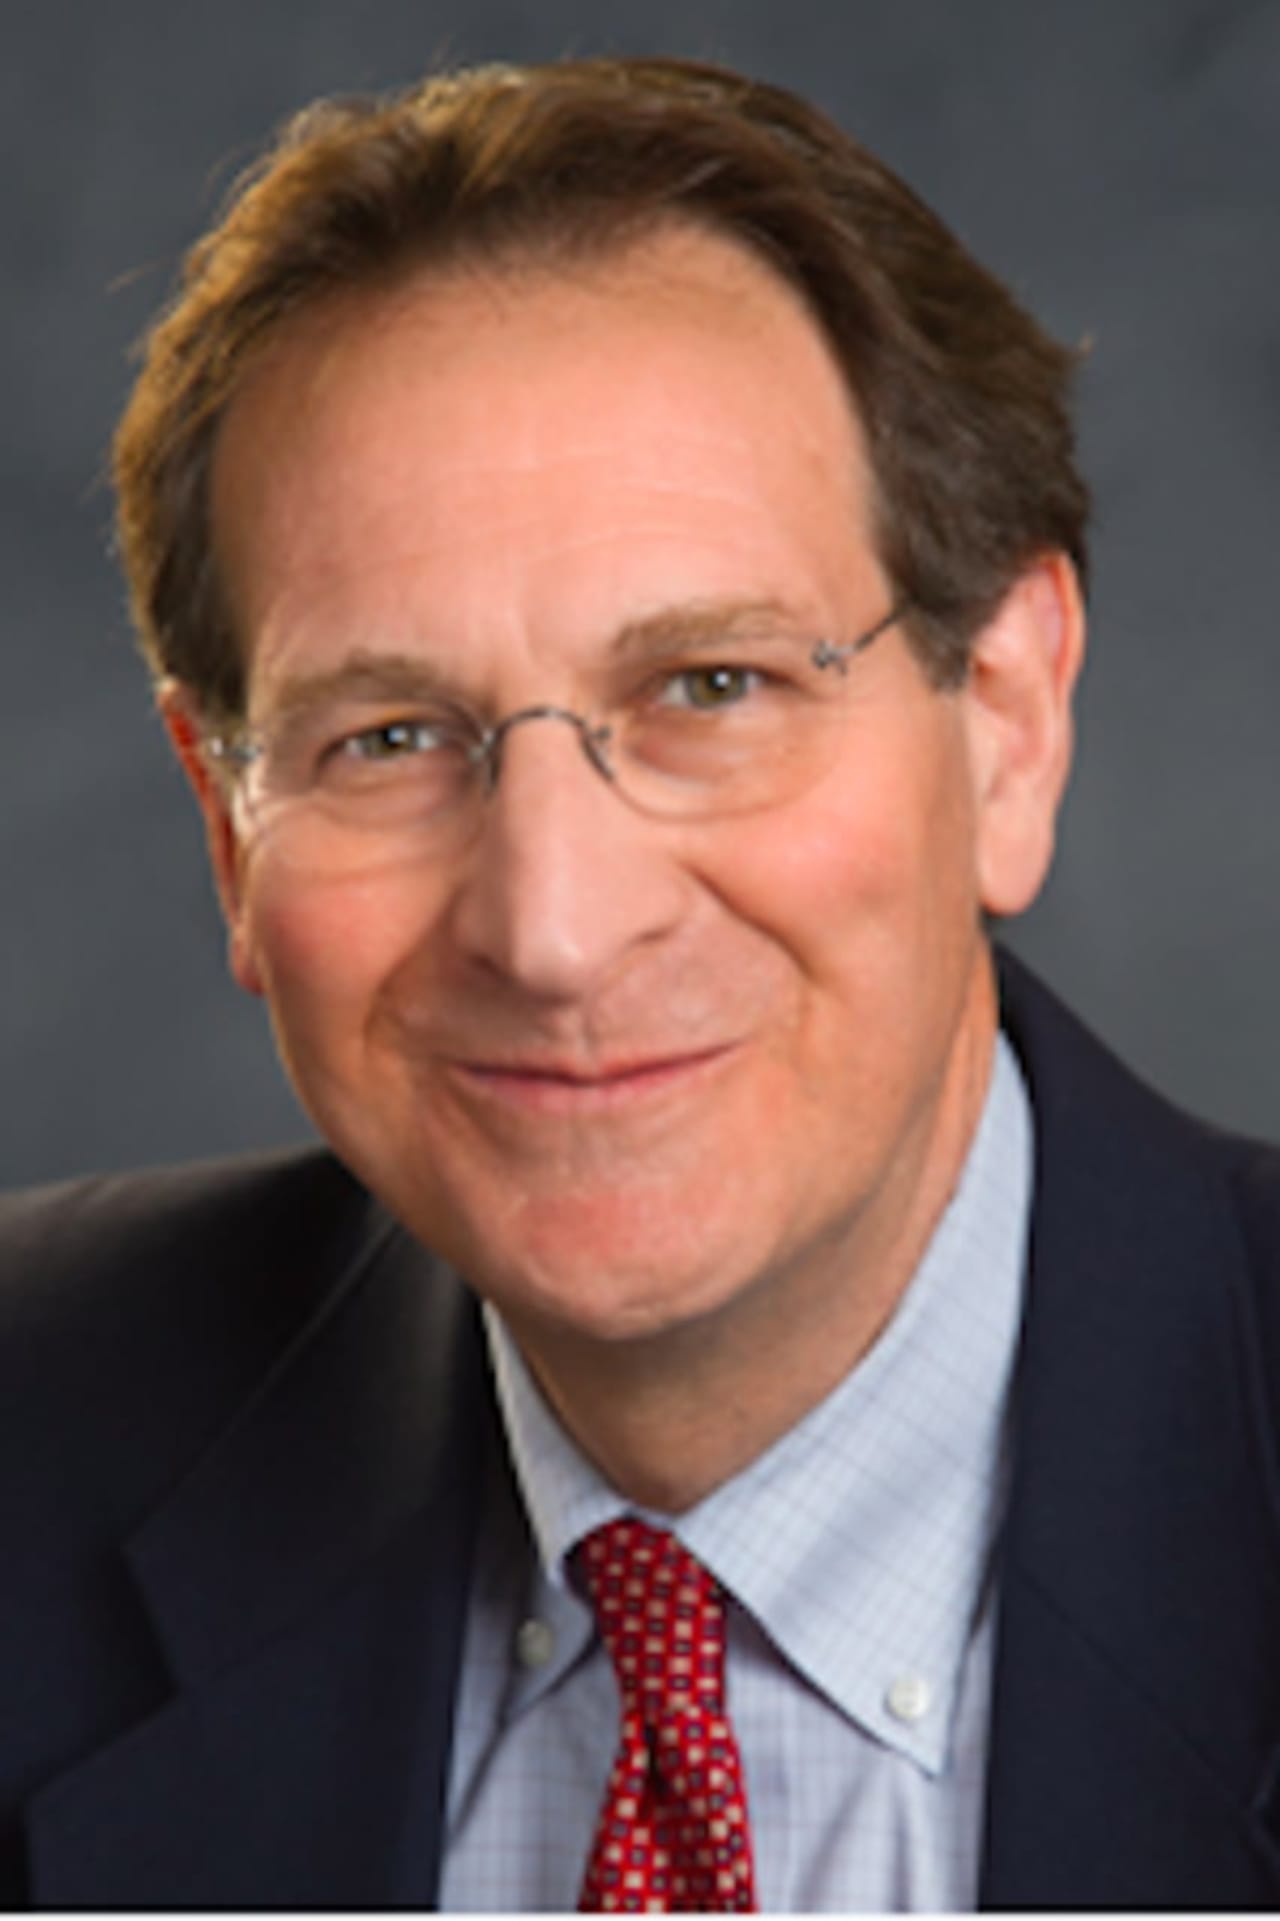 Ross Levy, MD, is Director of Dermatology, Mount Sinai Health System at CareMount Medical.